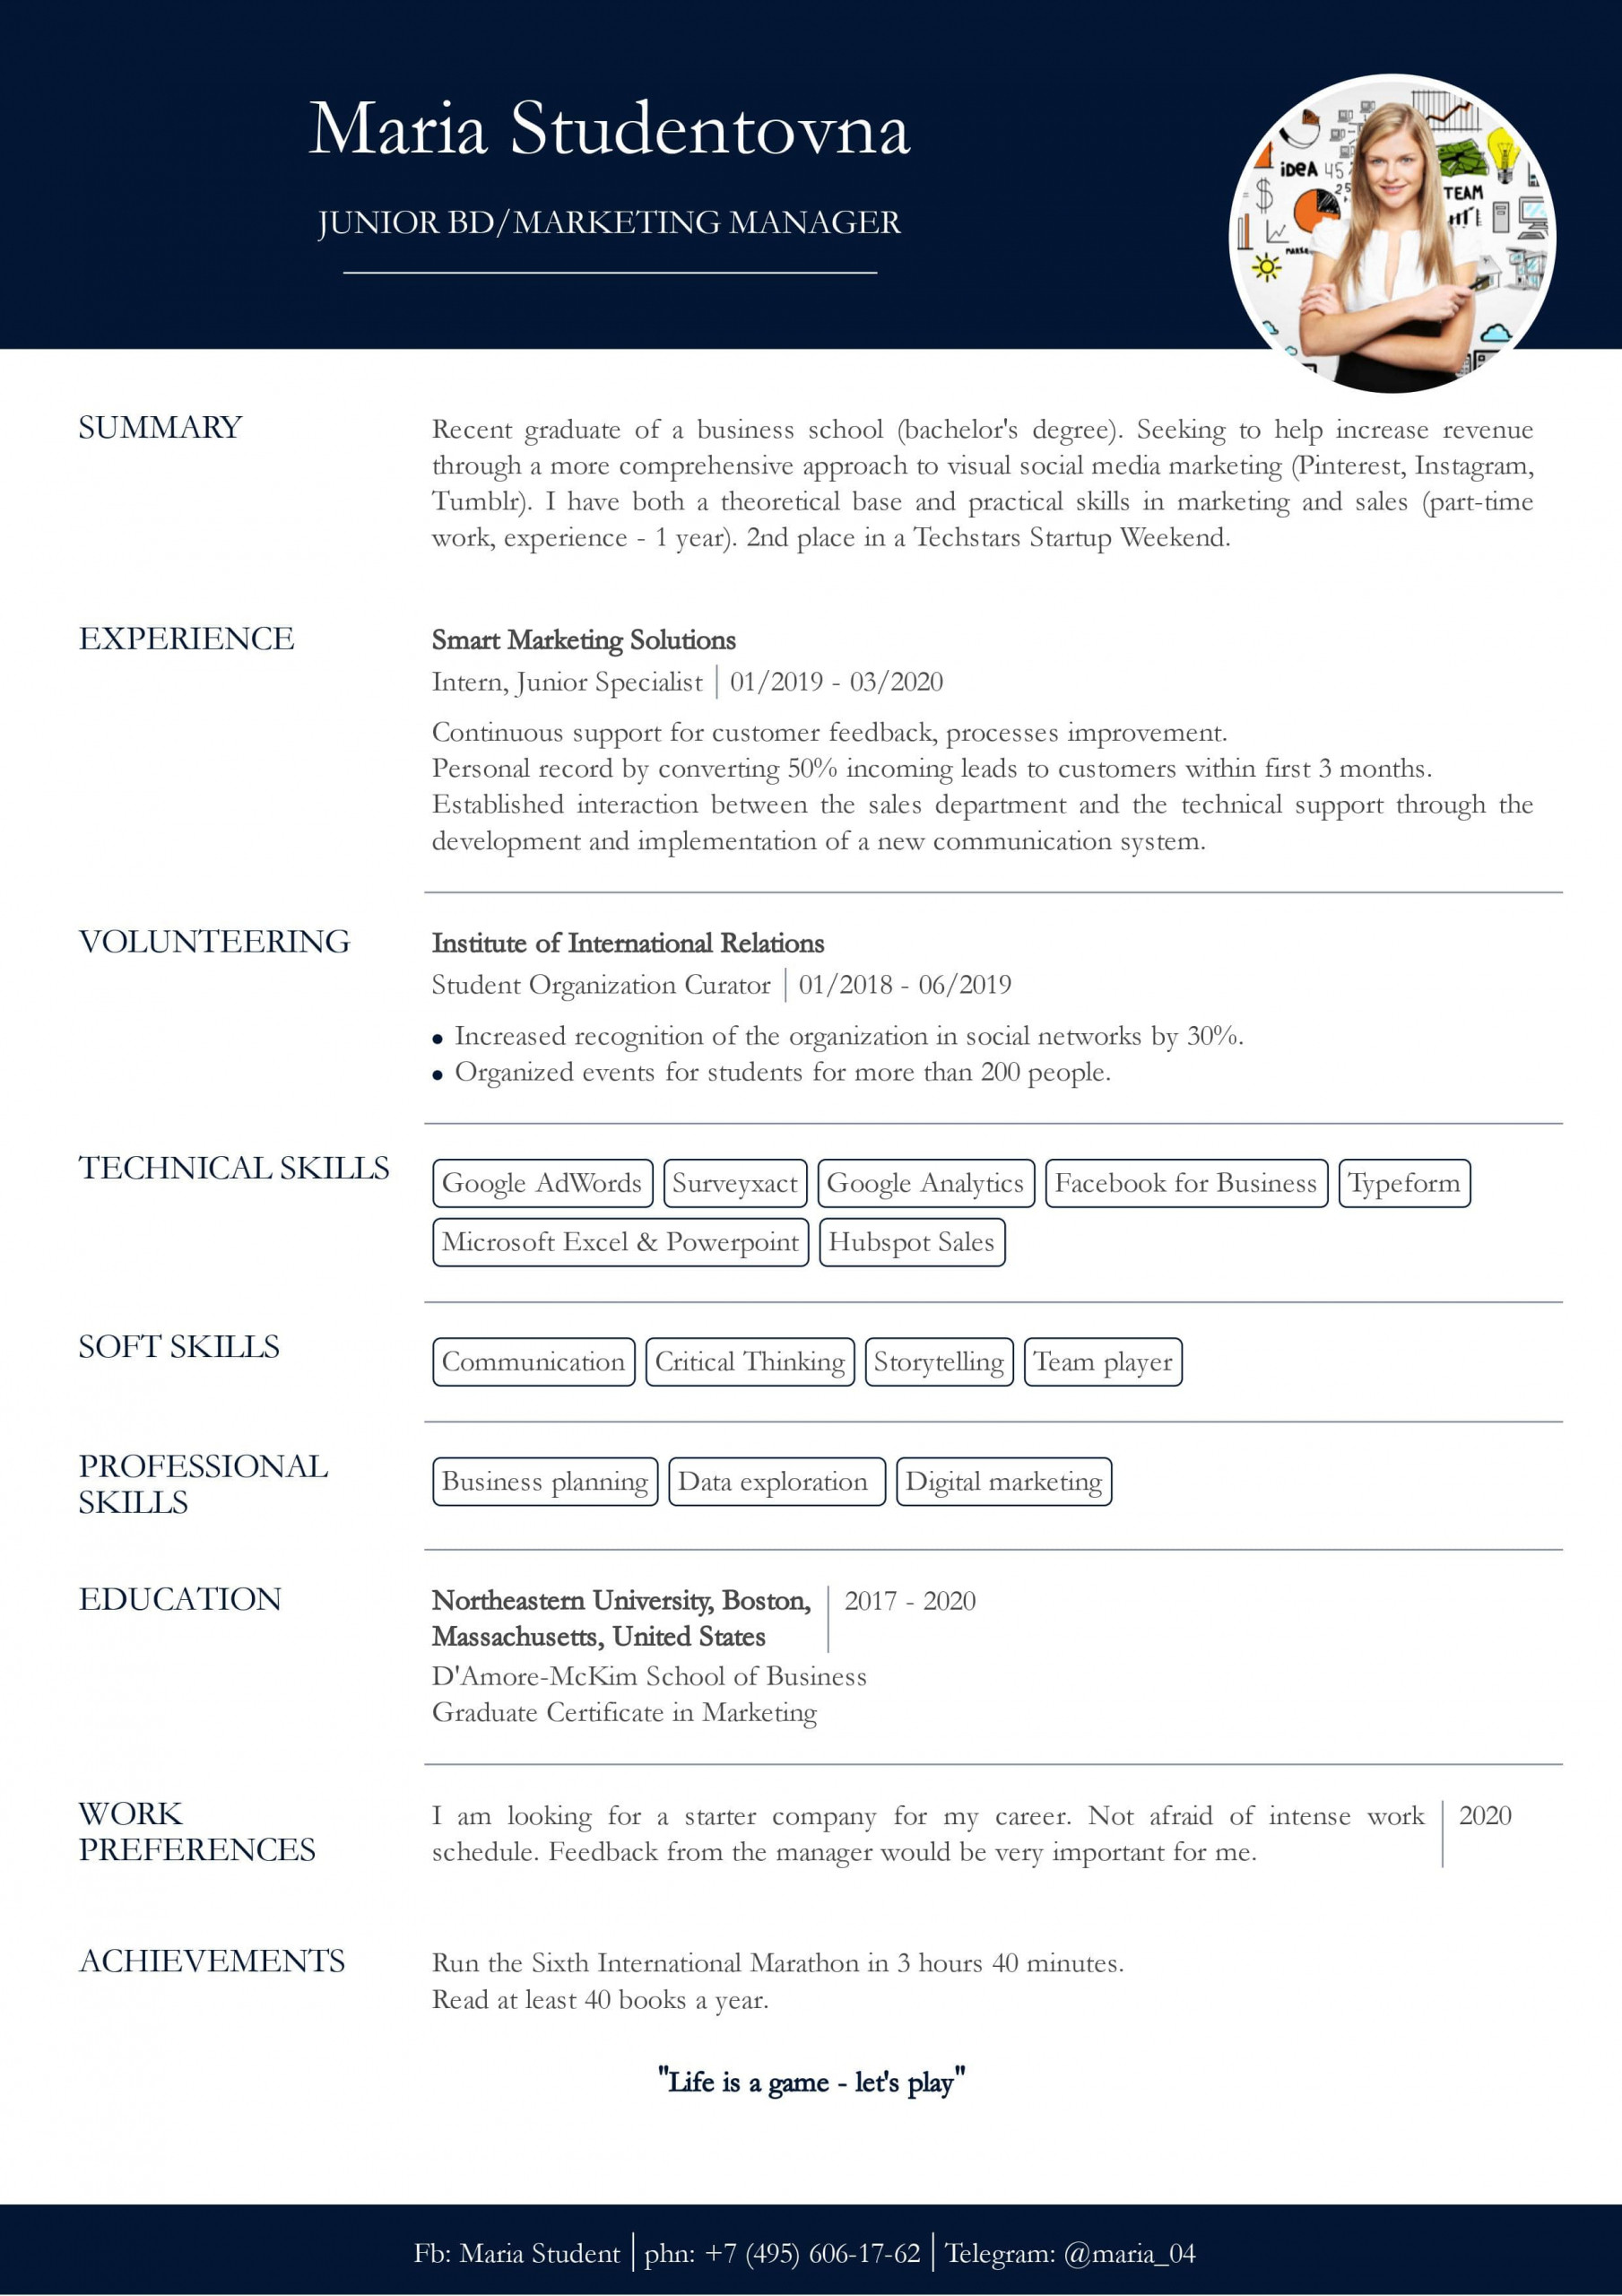 Sample Resume for A Person with No Experience Resume with No Work Experience. Sample for Students. – Cv2you Blog